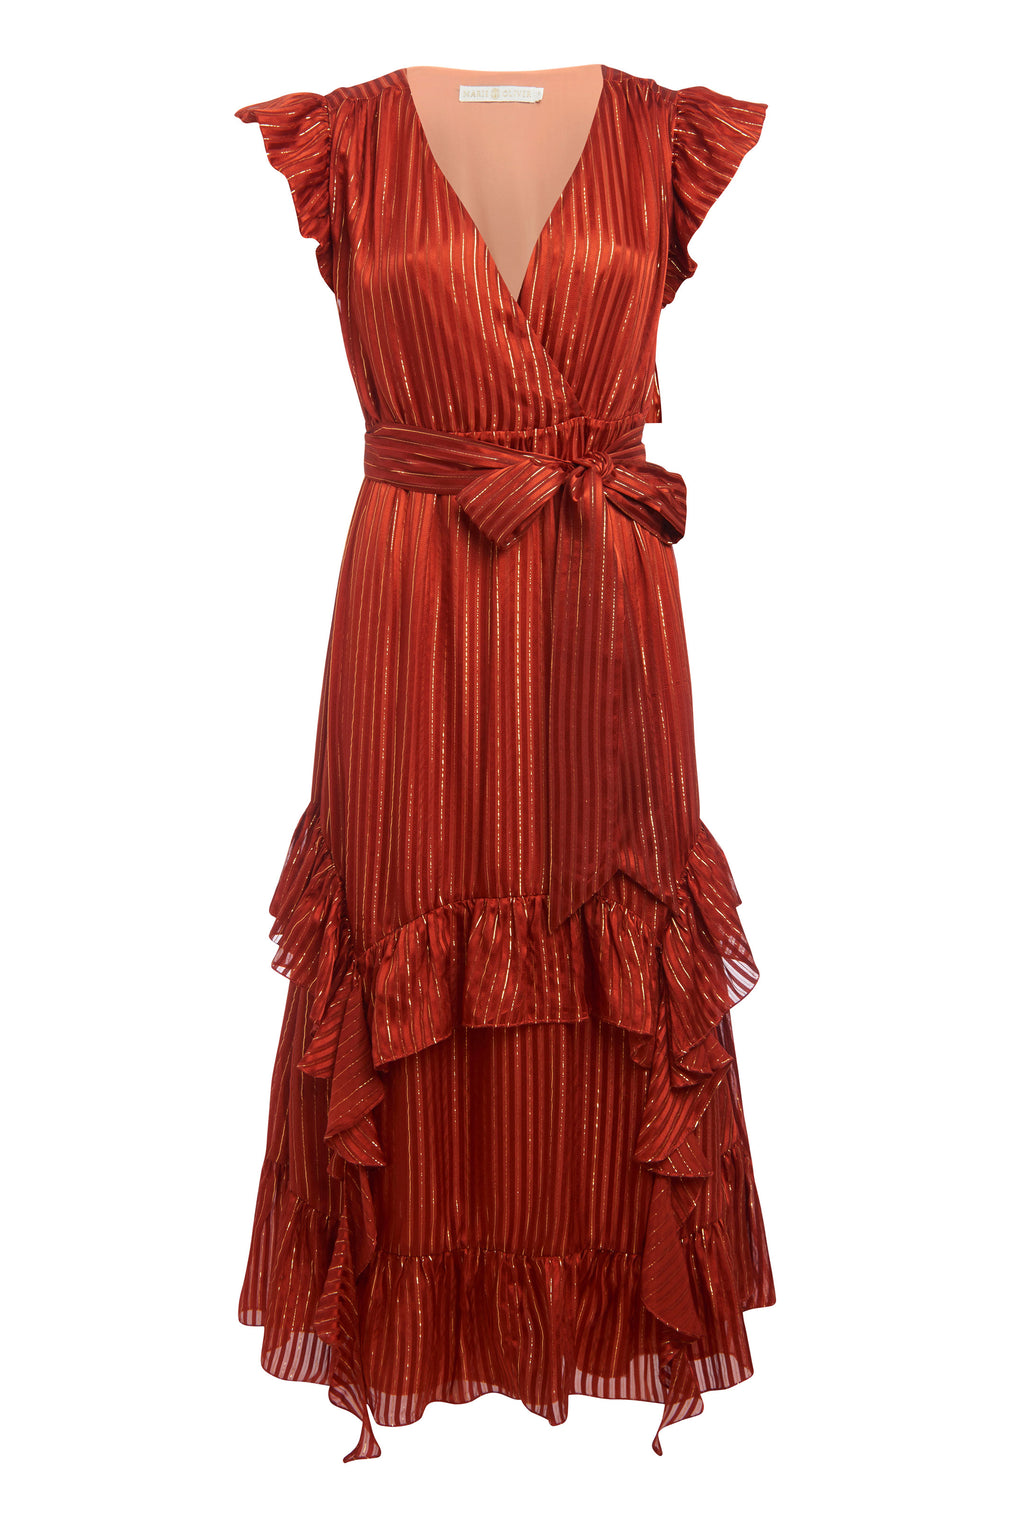 maxi dress with a tiered ruffle skirt and ruffle flutter sleeves and v-neckline with metallic stripe detailing throughout the dress